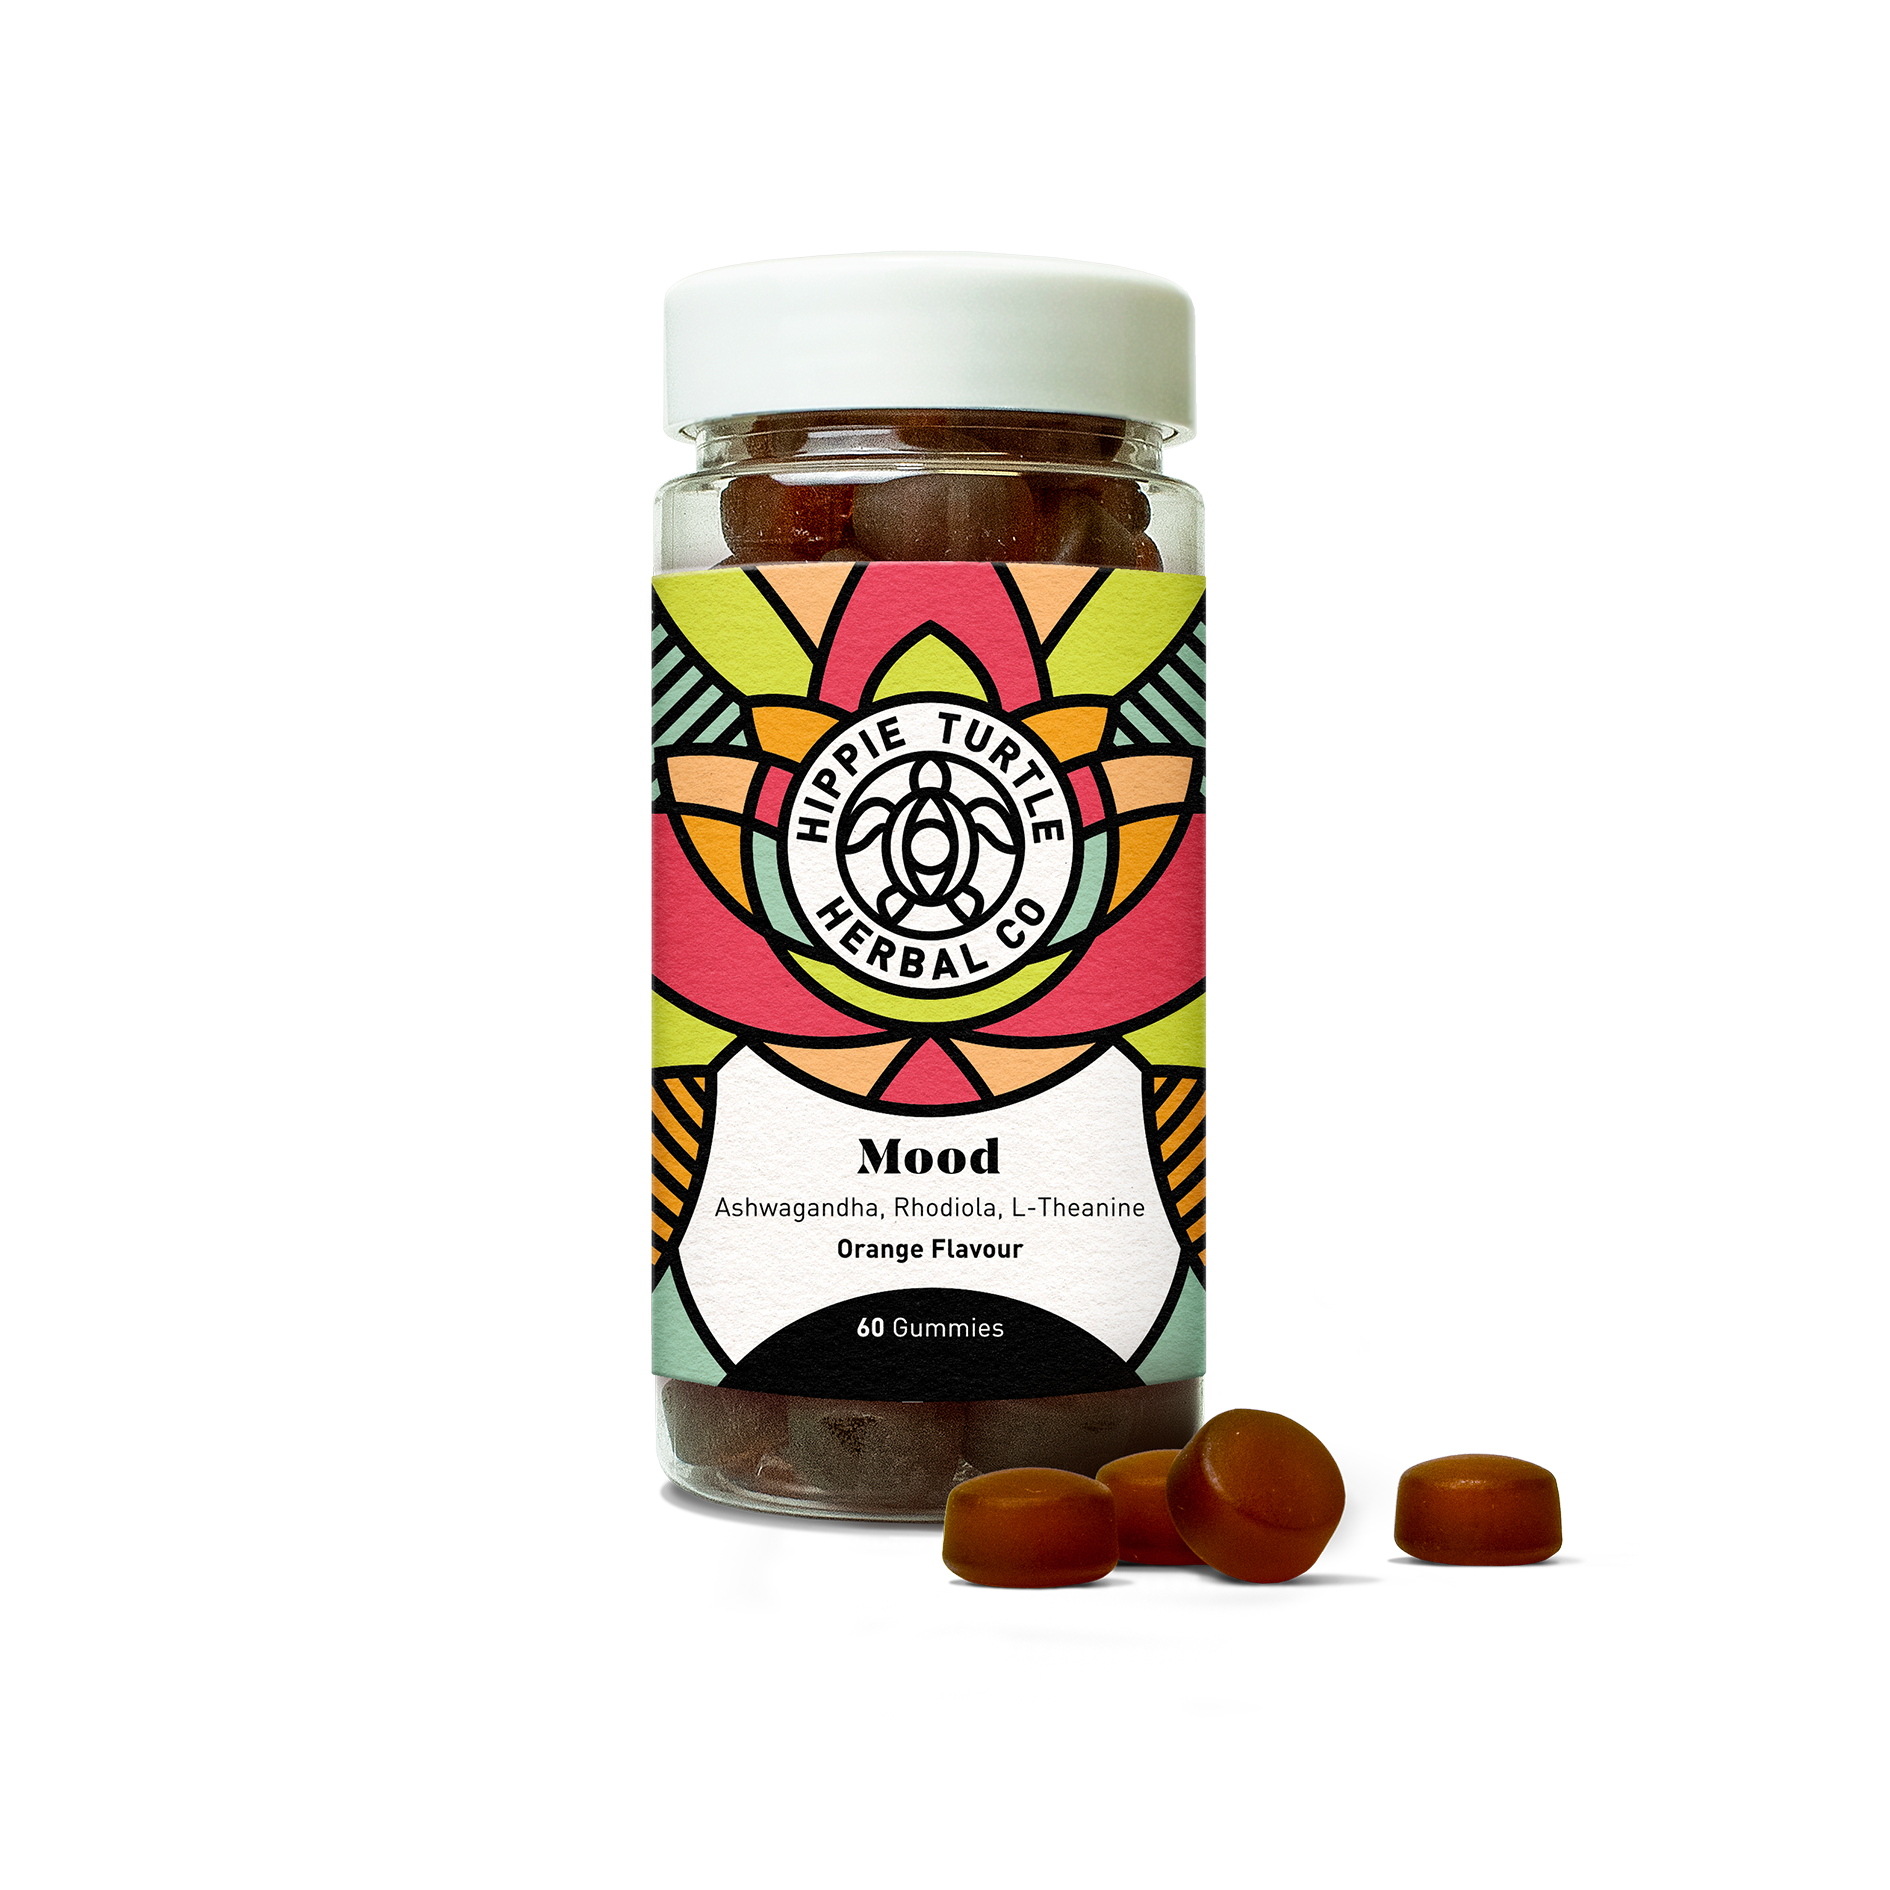 Chewable gummy supplement for stress, anxiety and mood. Containing chewable ashwagandha, l theanine, rhodiola and b vitamins